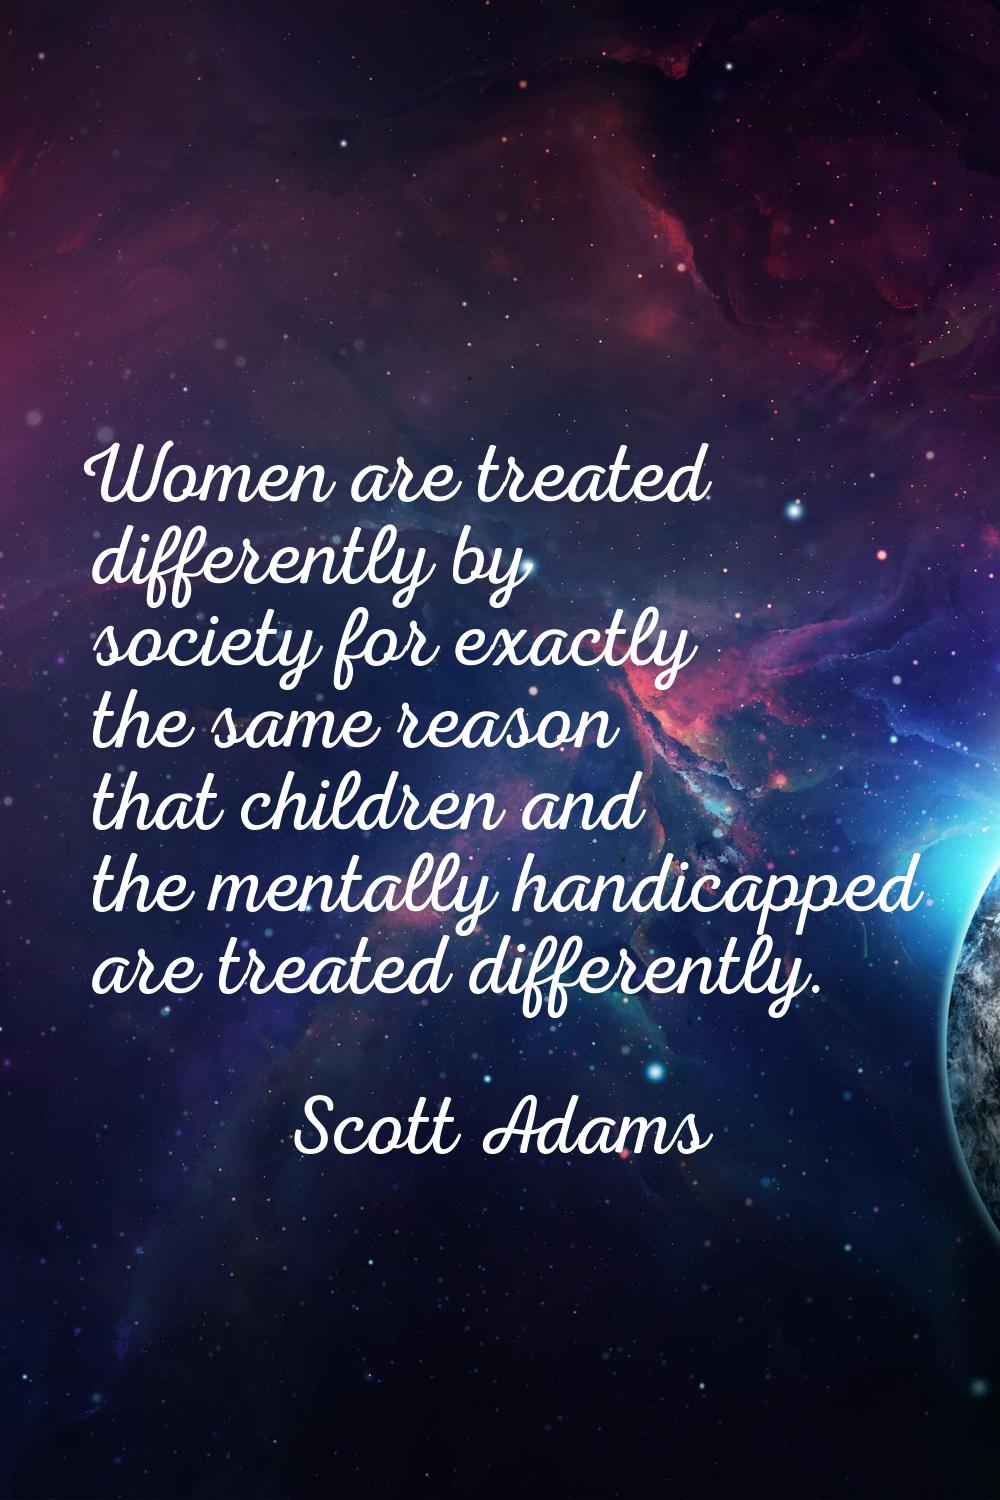 Women are treated differently by society for exactly the same reason that children and the mentally